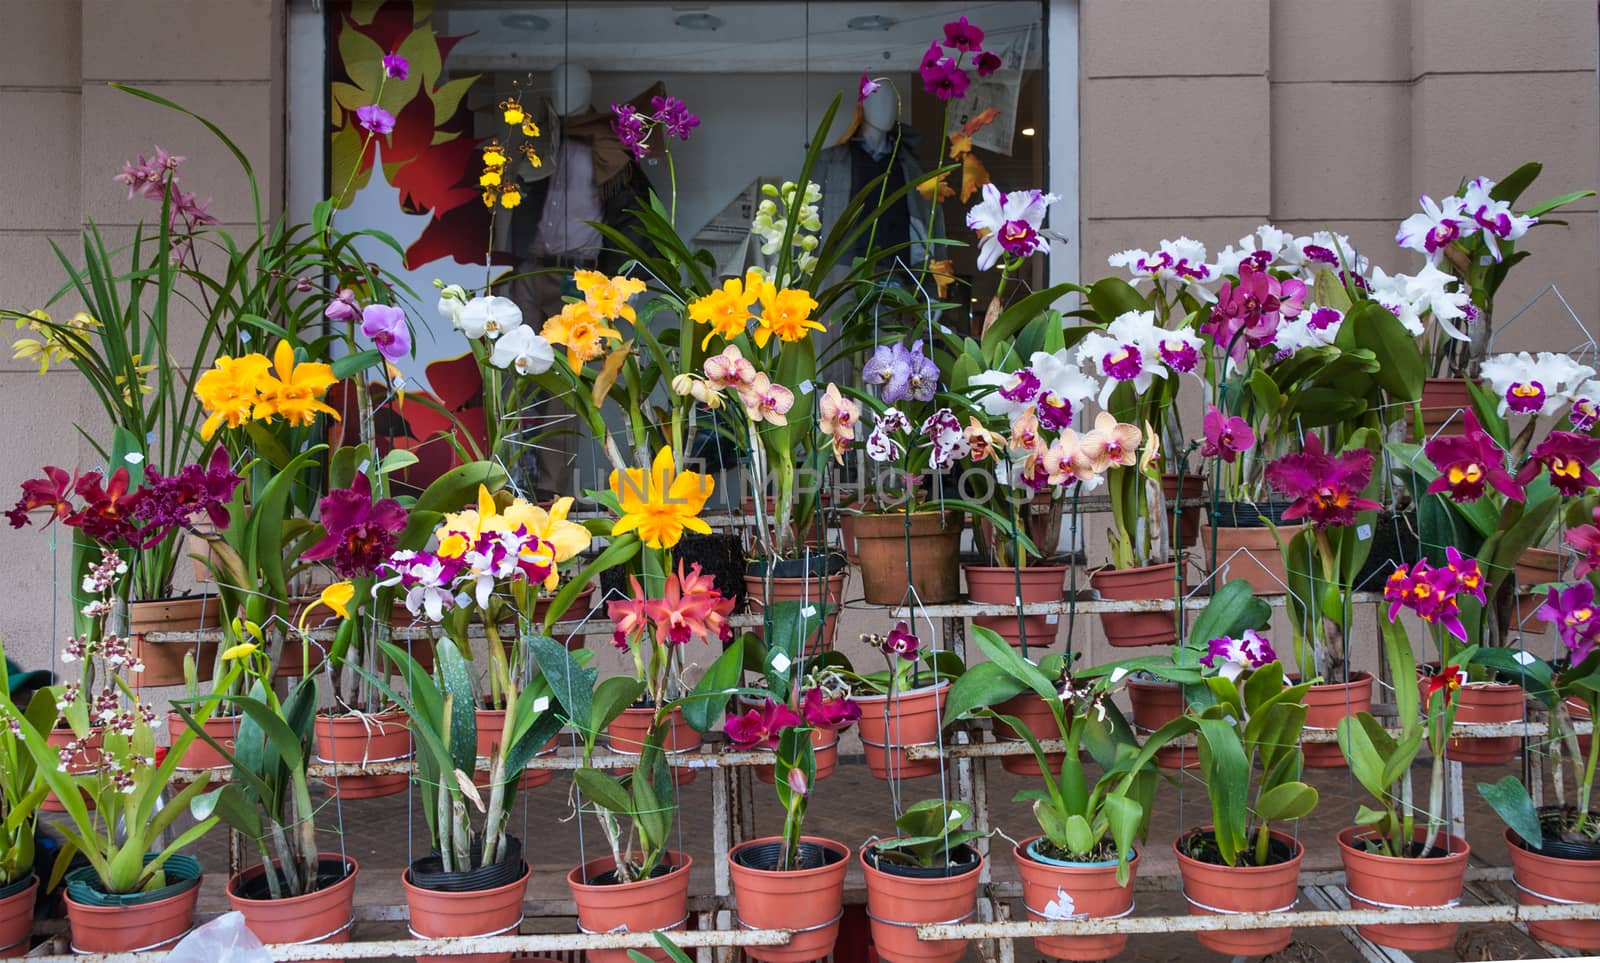 Orchids for sale, Street market in Asuncion, Paraguay.